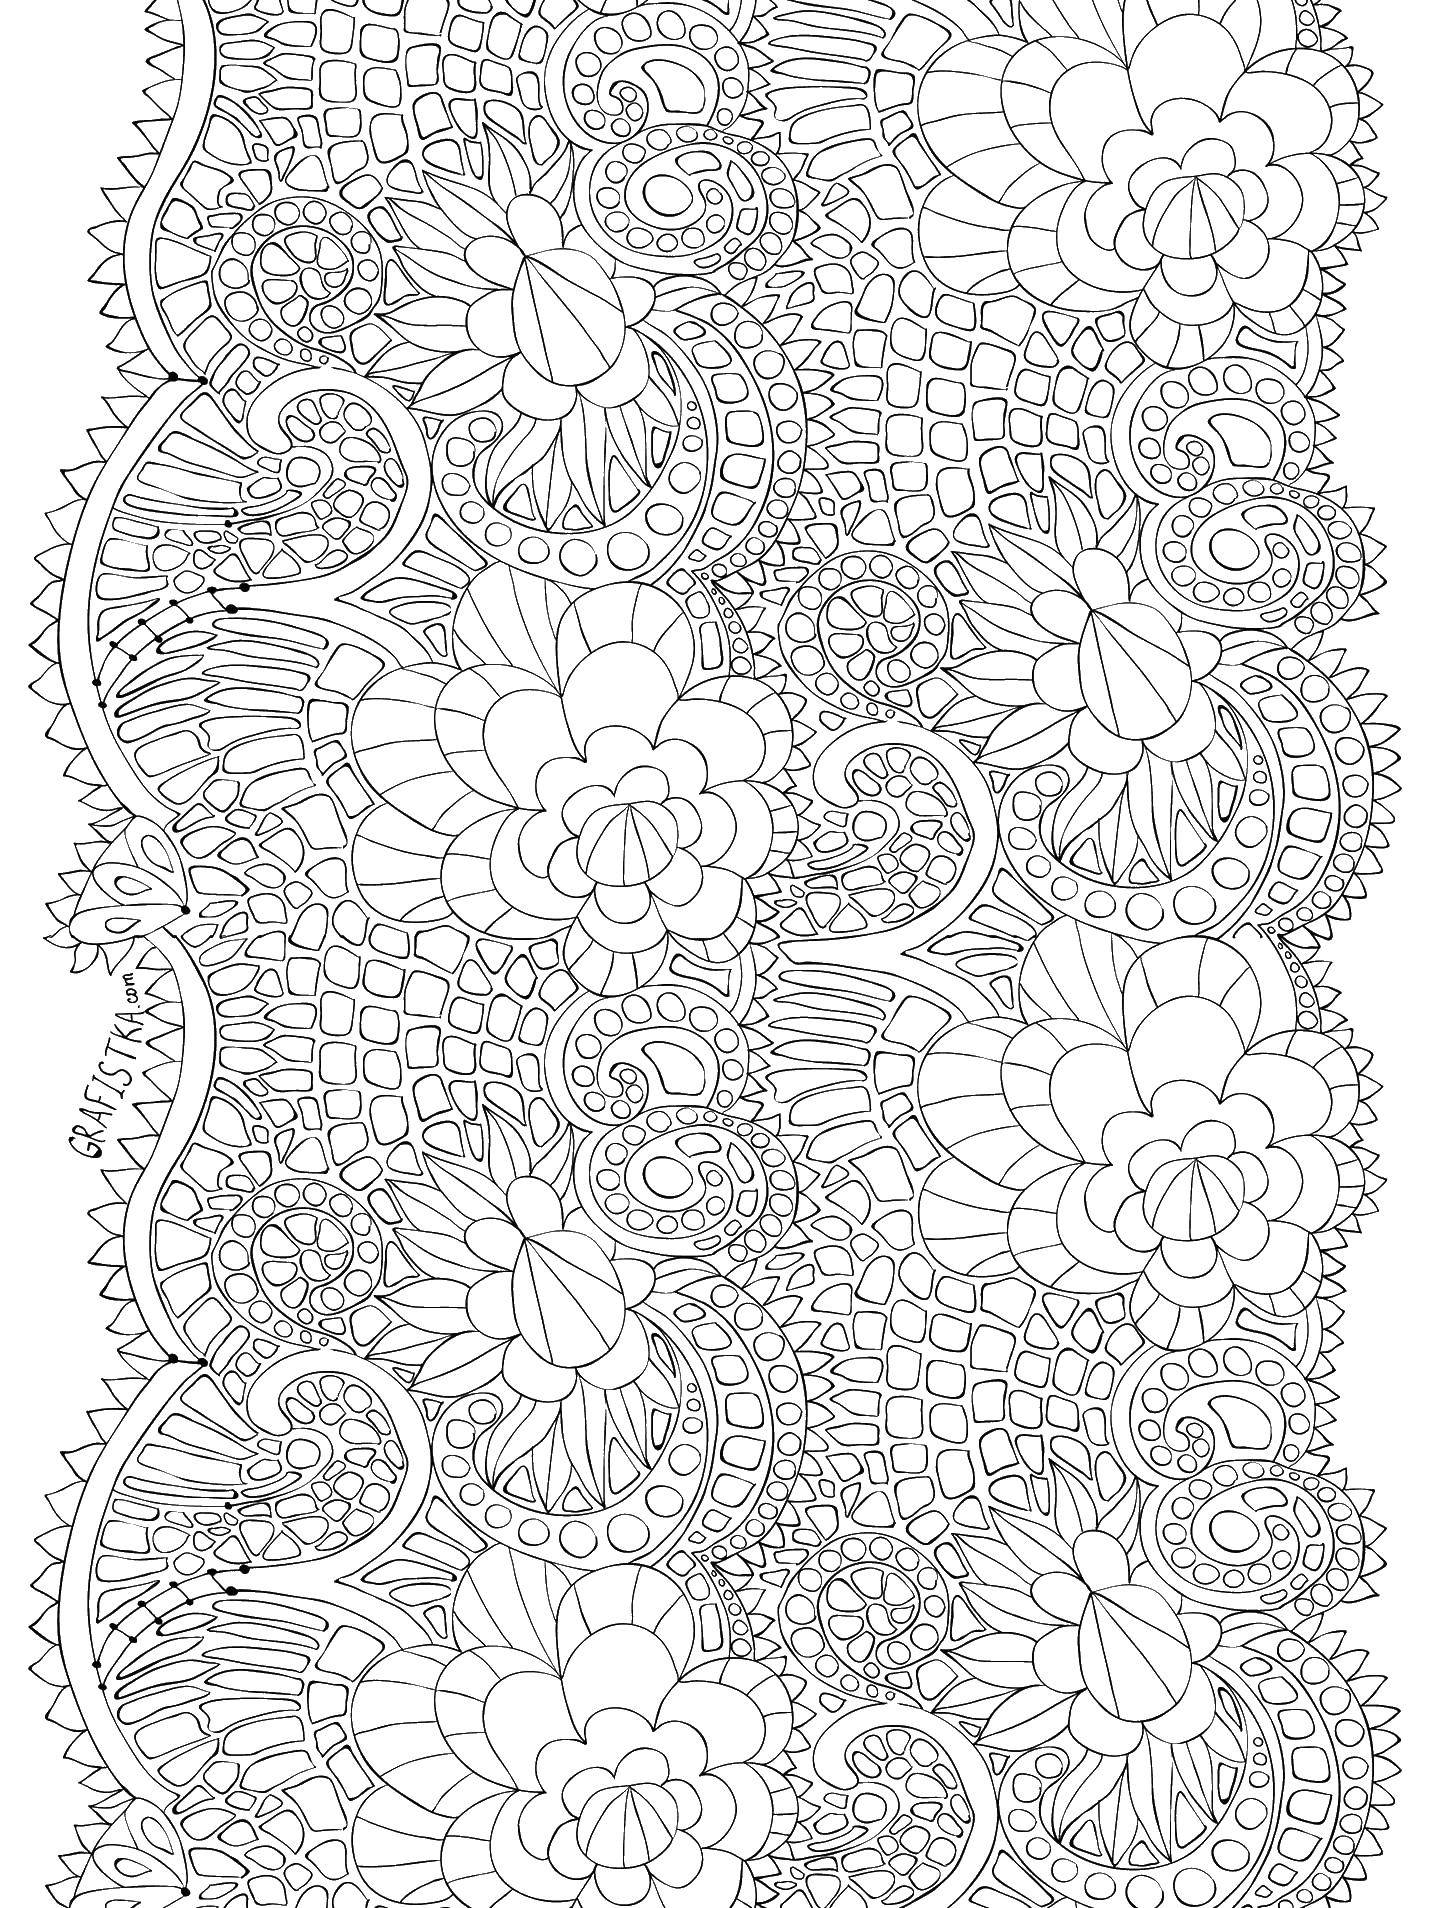 Coloring Coloring flowers antistress. Category coloring for adults. Tags:  coloring antistress.